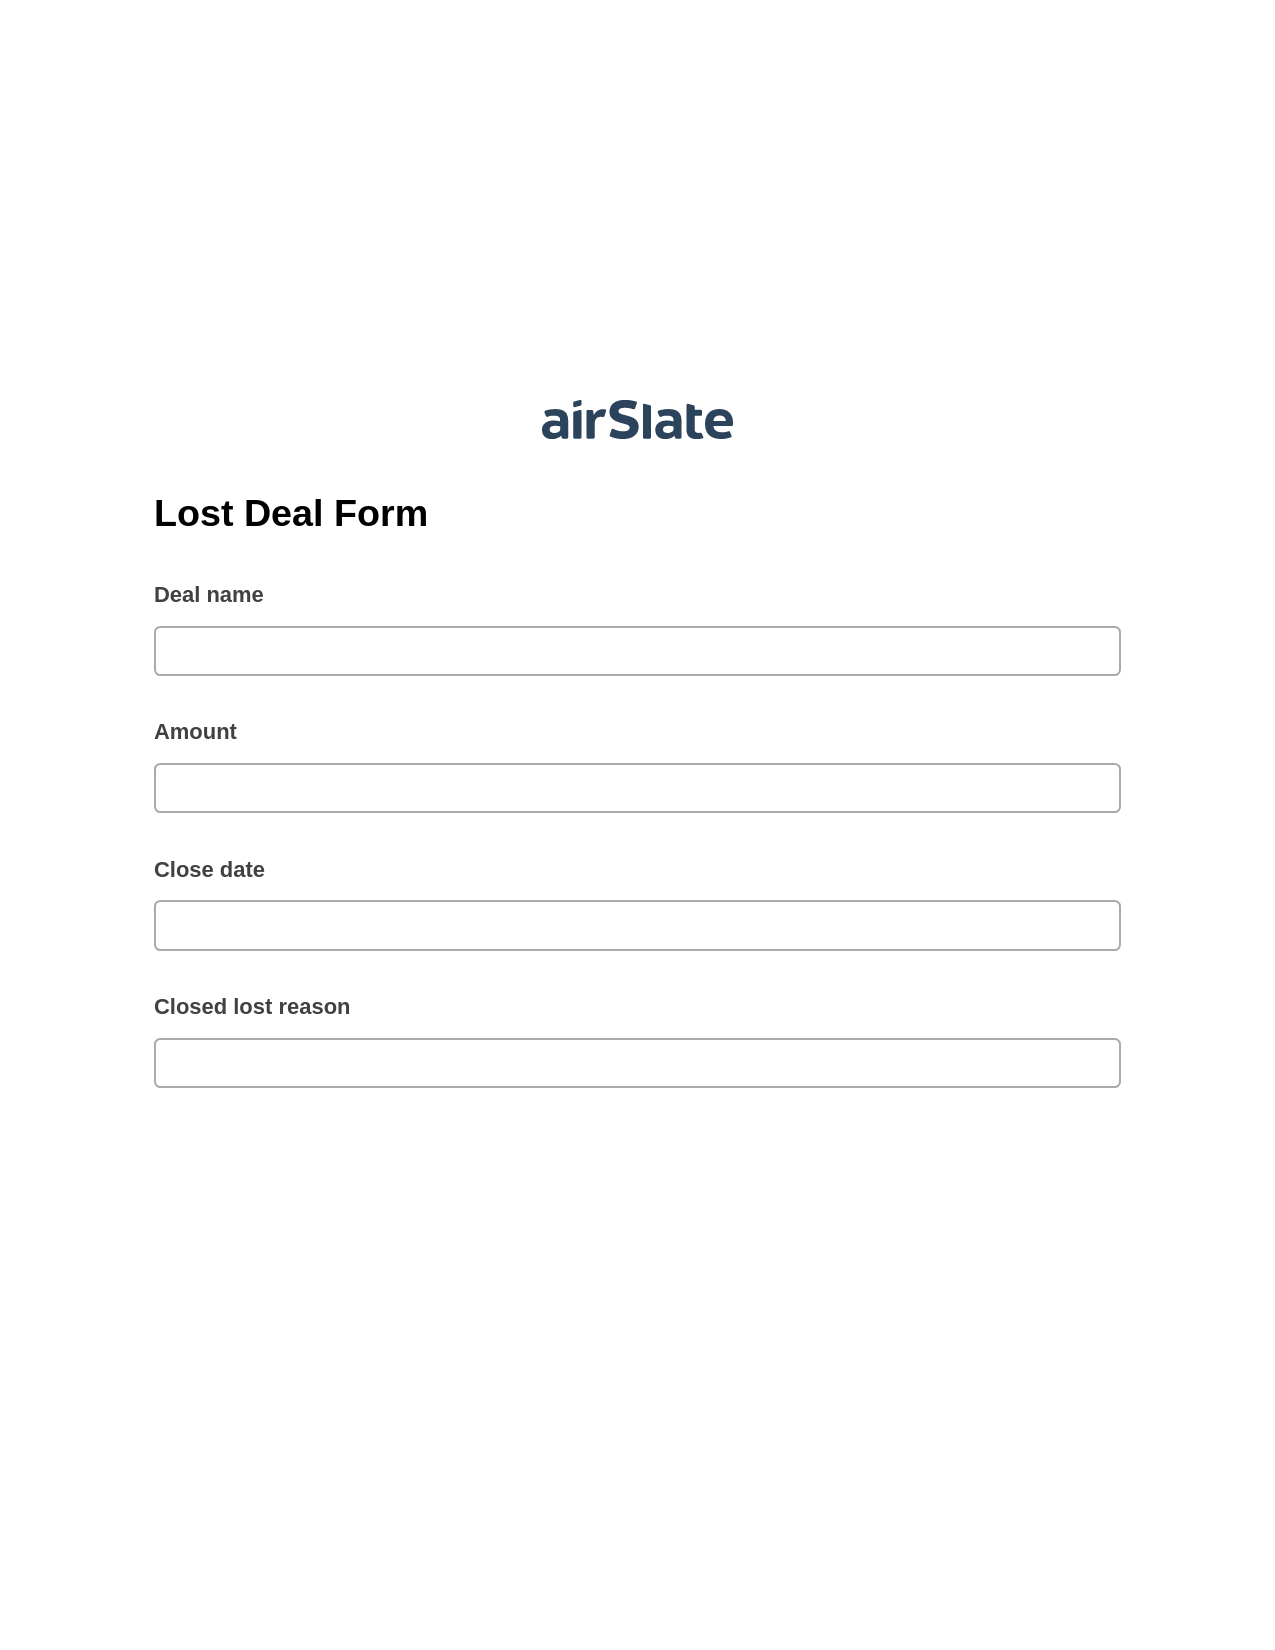 Lost Deal Form Pre-fill from CSV File Bot, Create MS Dynamics 365 Records Bot, Post-finish Document Bot